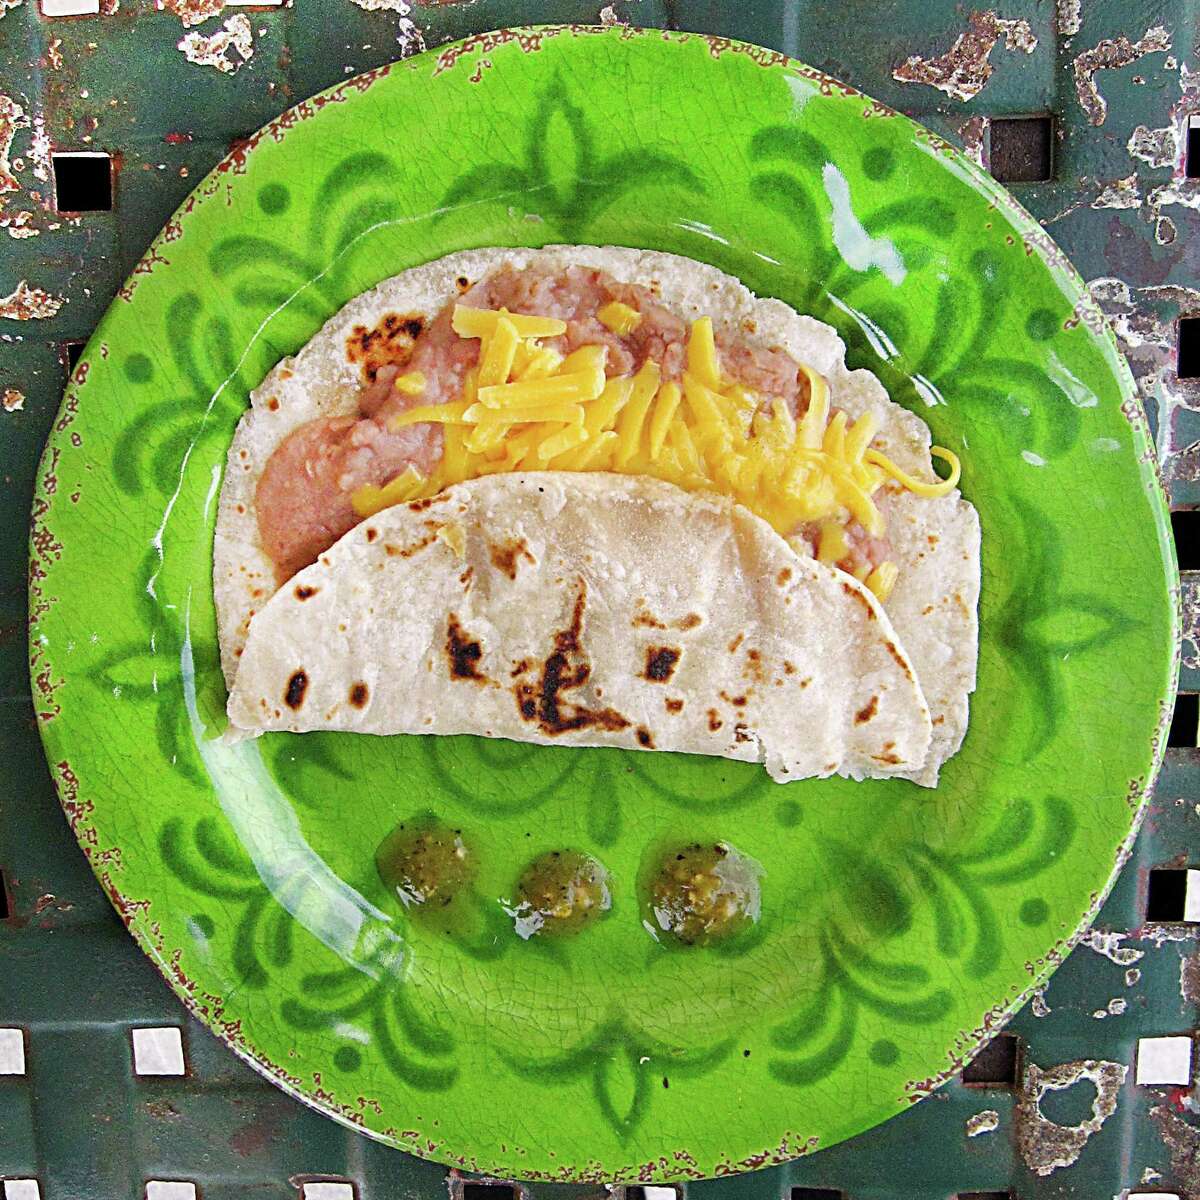 Bean and cheese taco on a handmade flour tortilla from Maria's Cafe on Nogalitos Street.